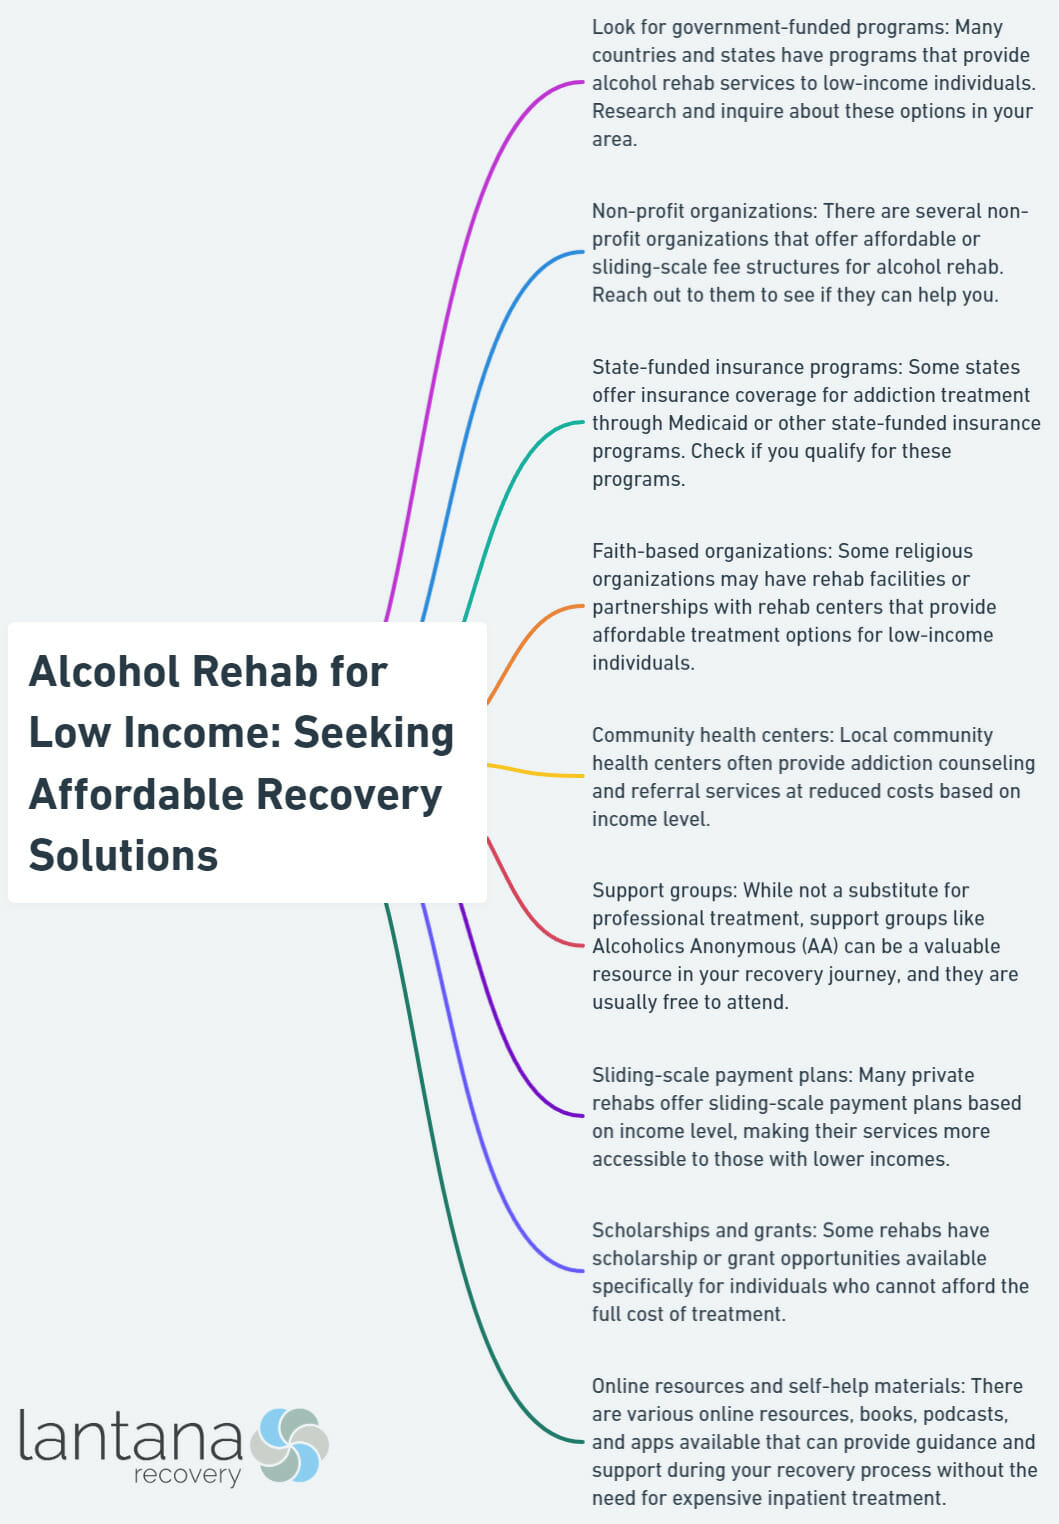 Alcohol Rehab for Low Income_ Seeking Affordable Recovery Solutions